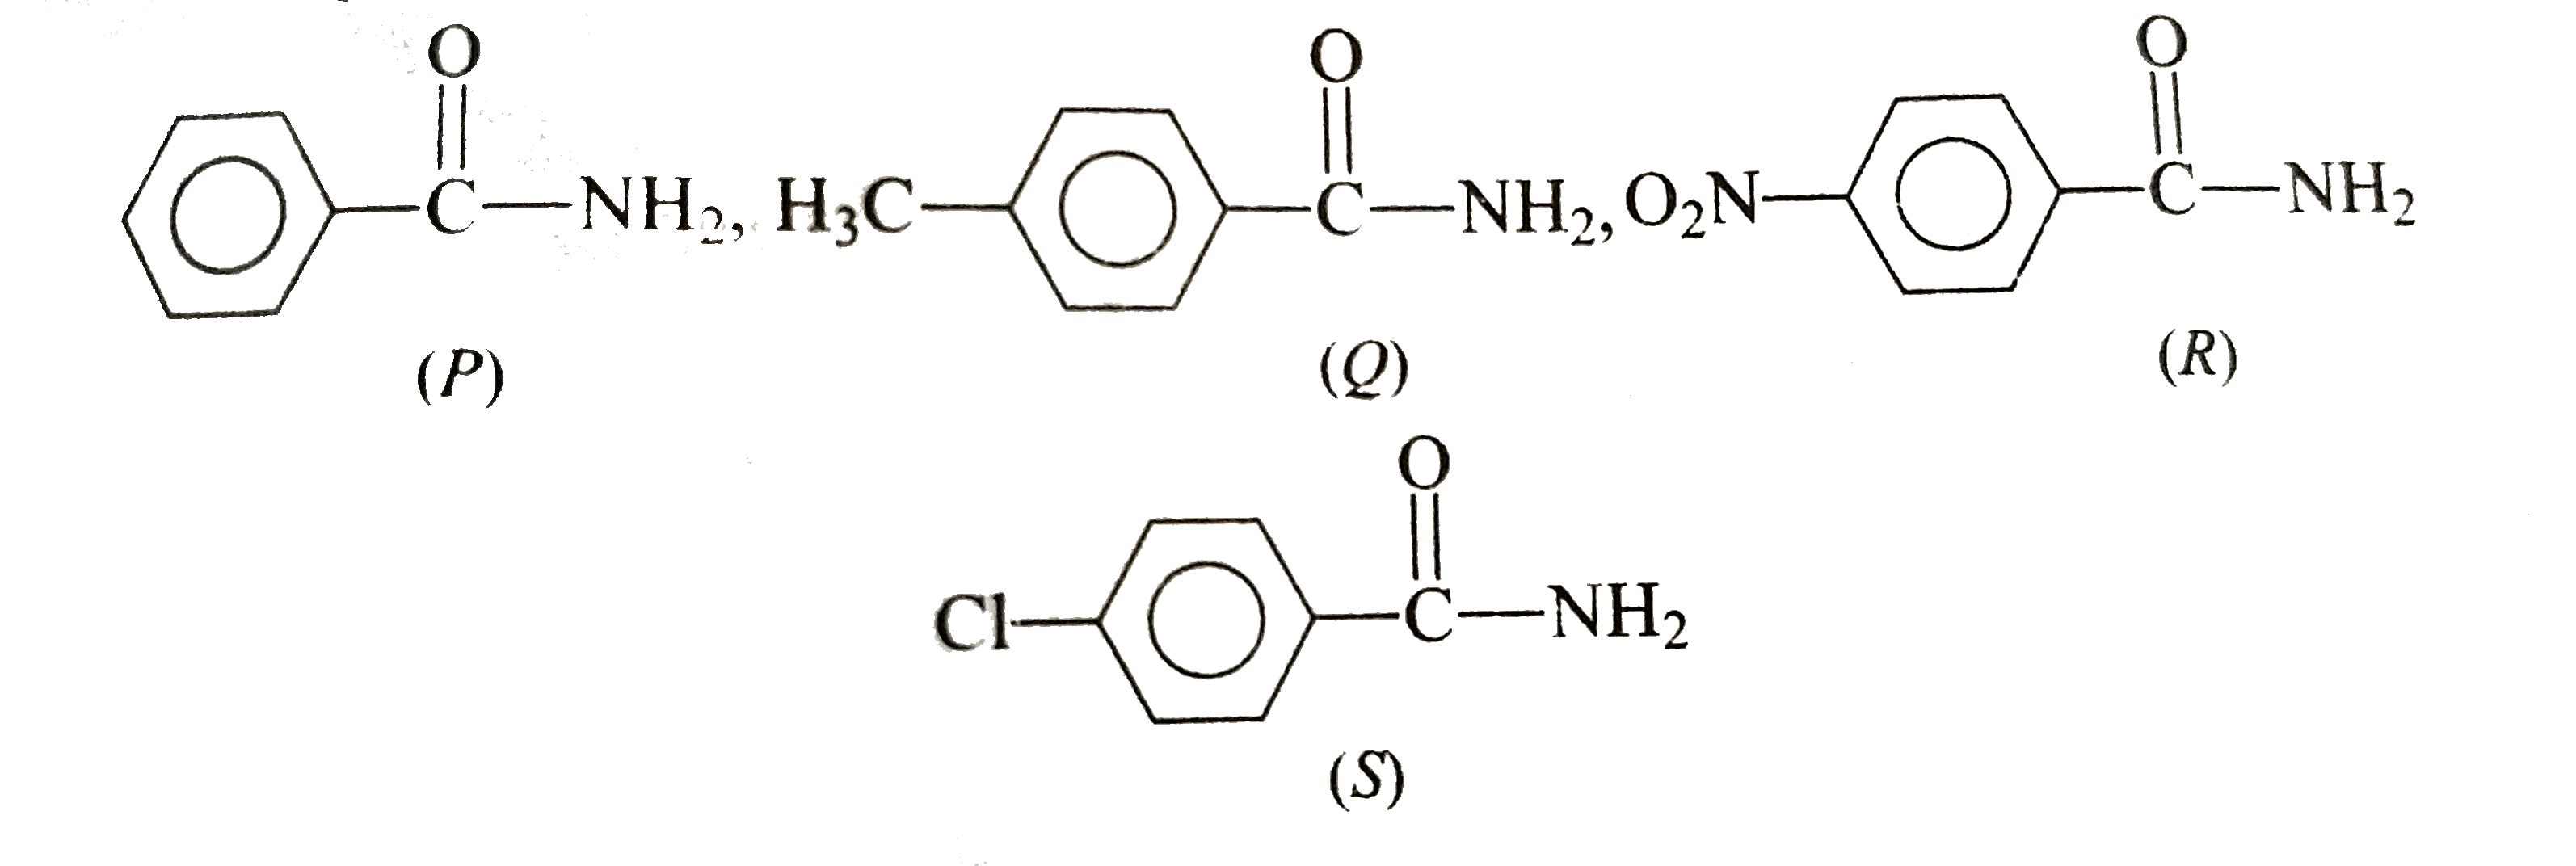 Arrange the following amides according to their relative reactivity when treated with Br(2) in excees of strong base.